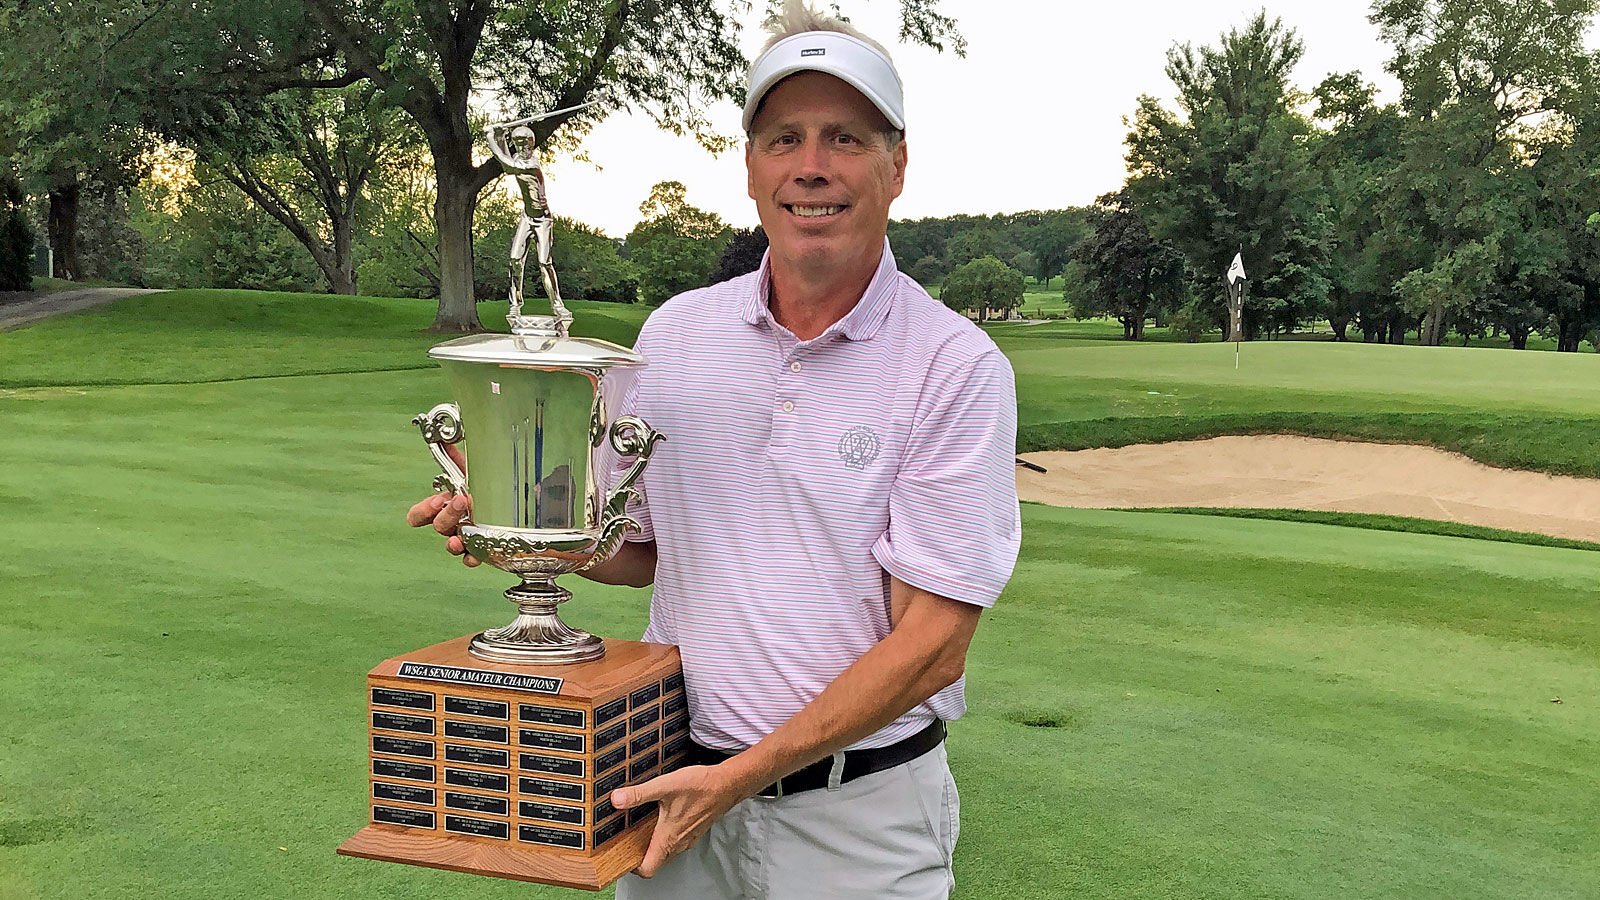 Adam Miller shatters his starter goal for 2021 and earns WSGA Player of the Year; Bob Gregorski wins his first Senior POY award WSGA State Amateur wisconsin.golf hq nude photo